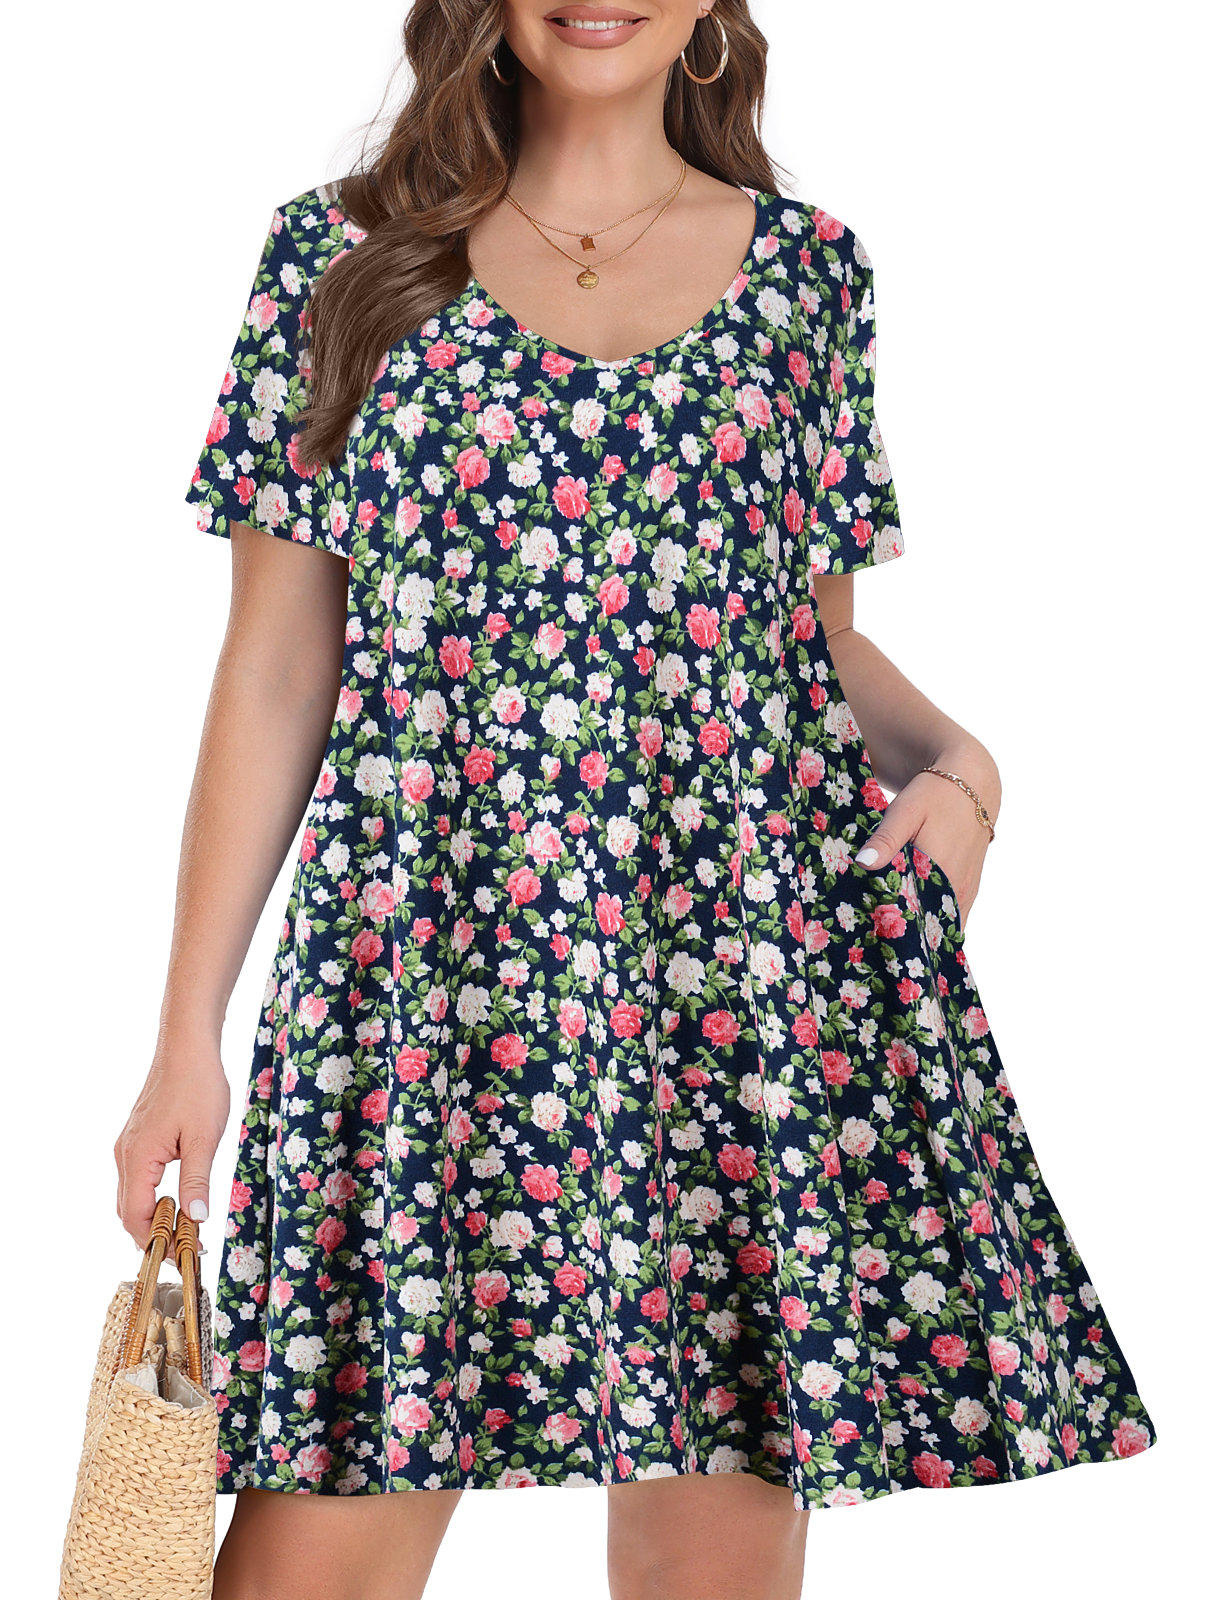 Plus Size Dresses 2X for Women, VEPKUL V Neck T Shirt Dress 2024 Short Sleeve Casual Loose Swing Summer Dress Floral Printed with Pockets - image 1 of 9